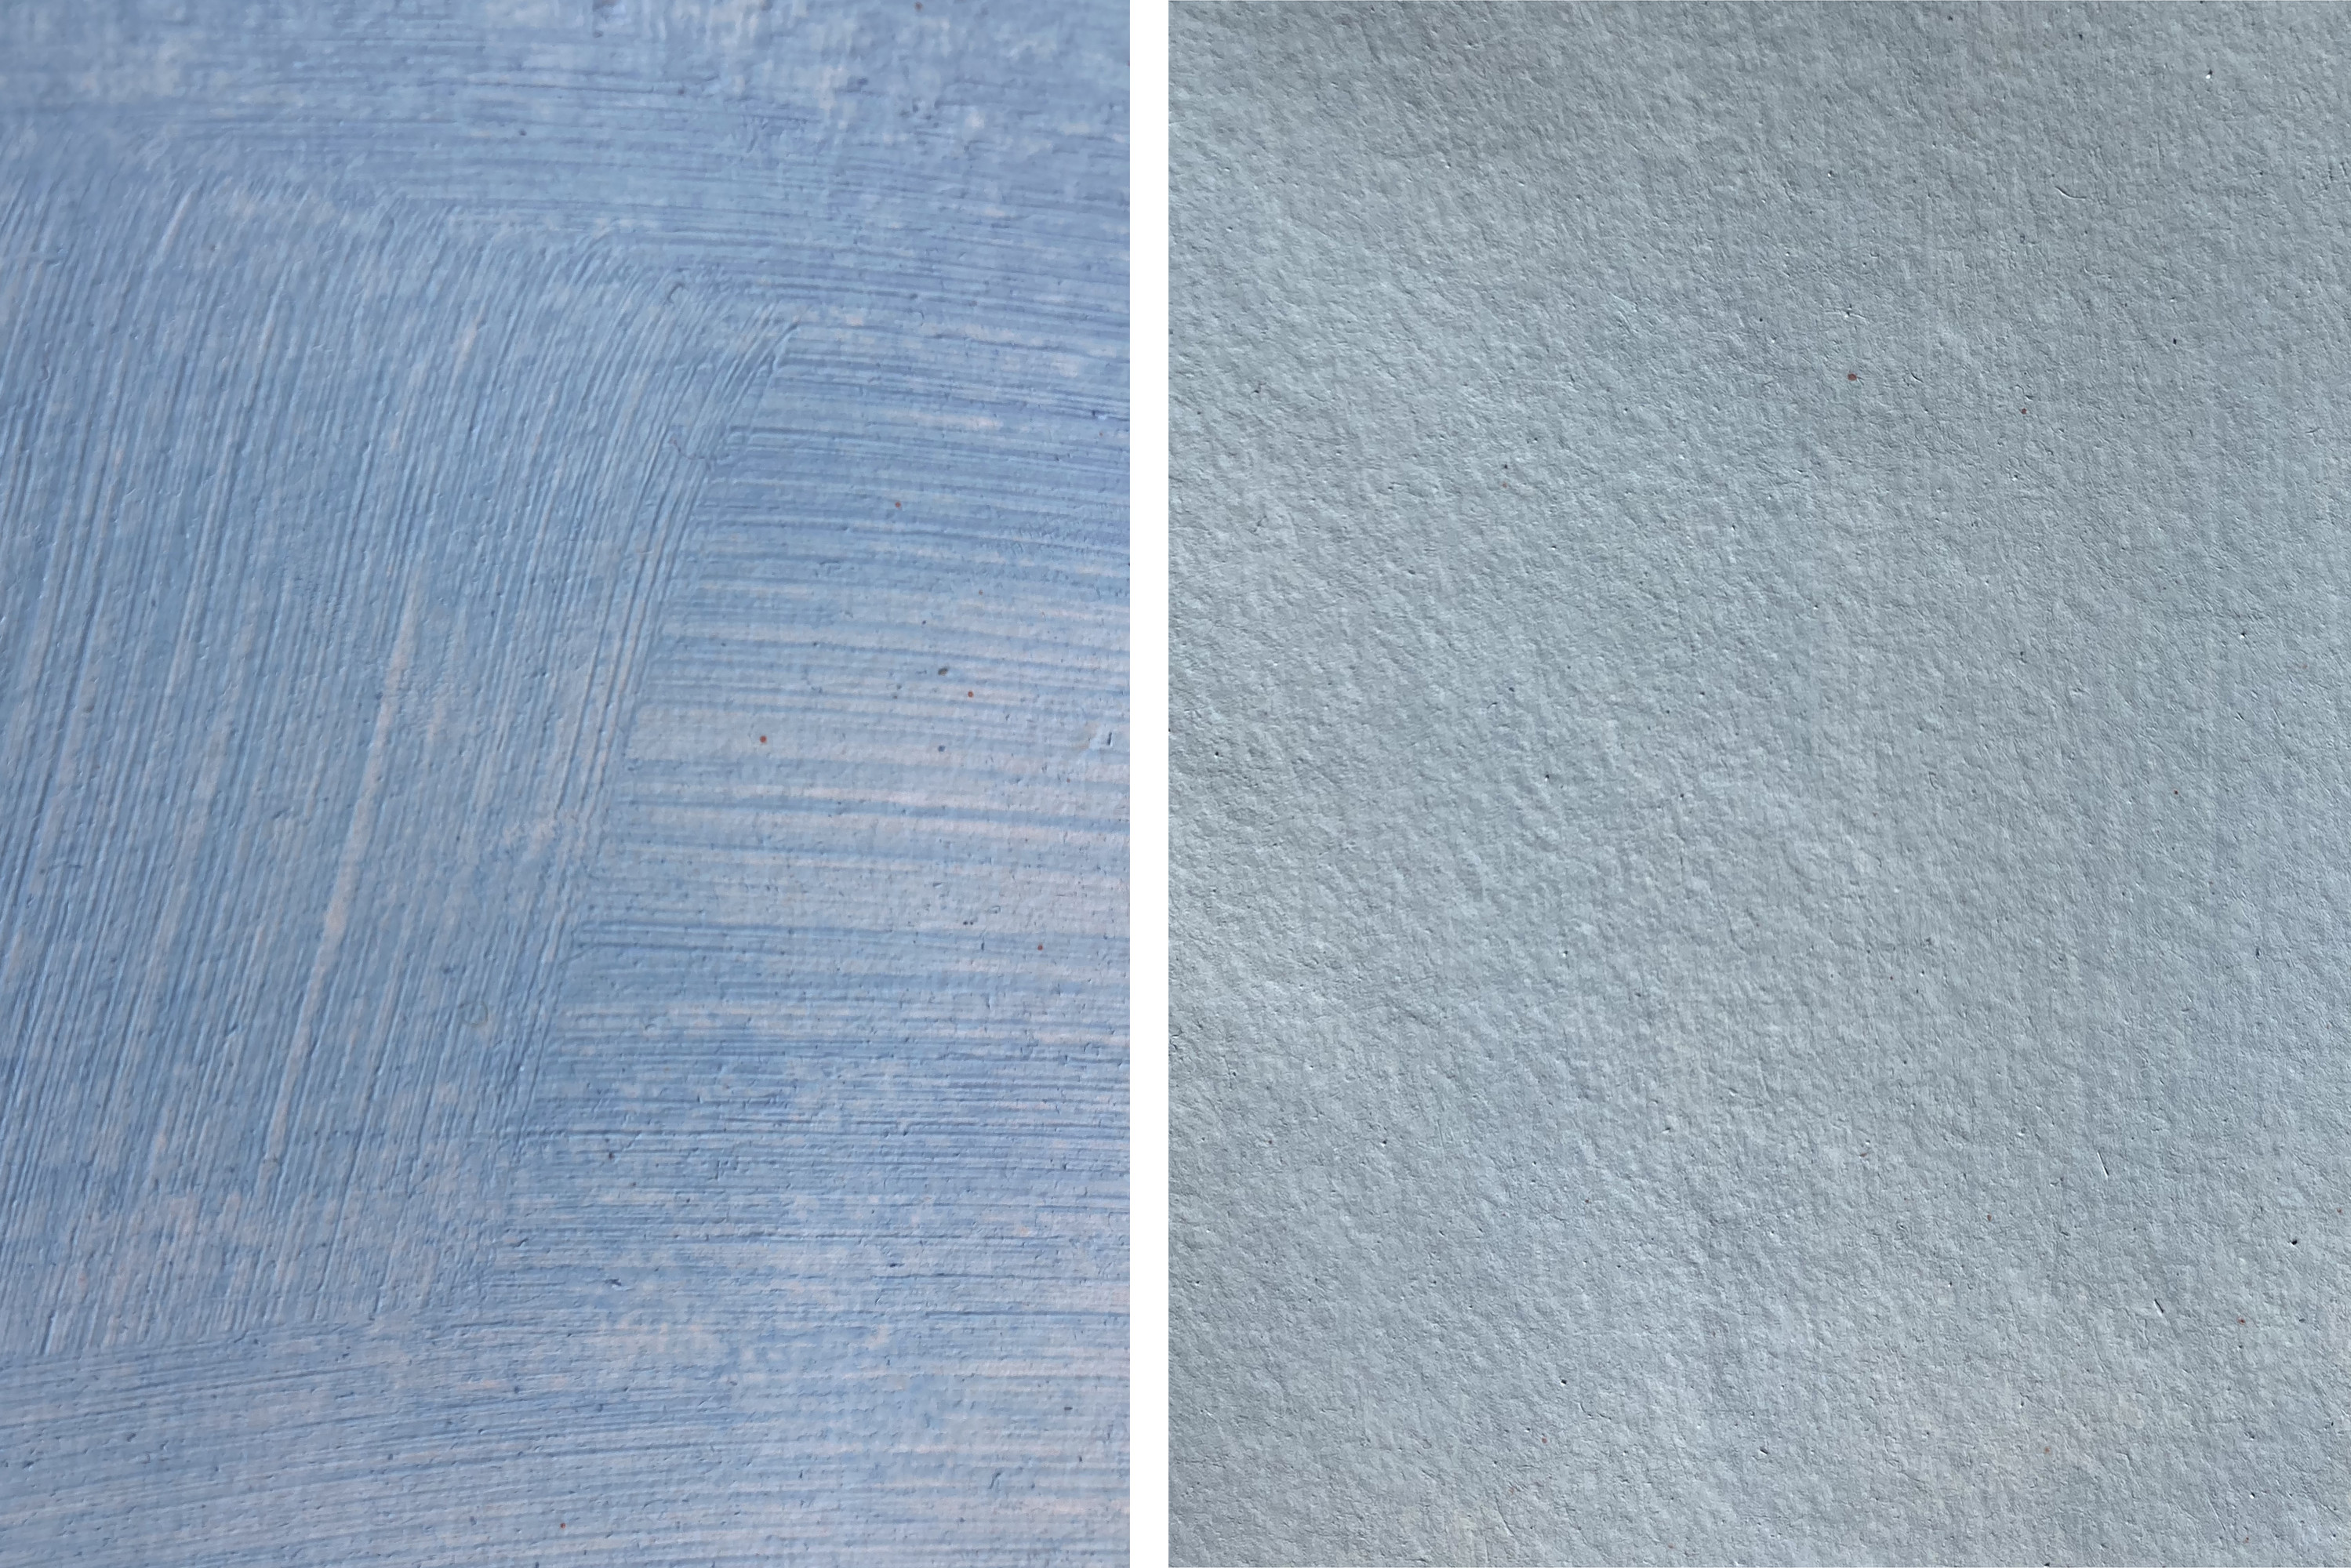 Two rectangles of blue paint on white paper; the left-hand rectangle has lots of brushmarks